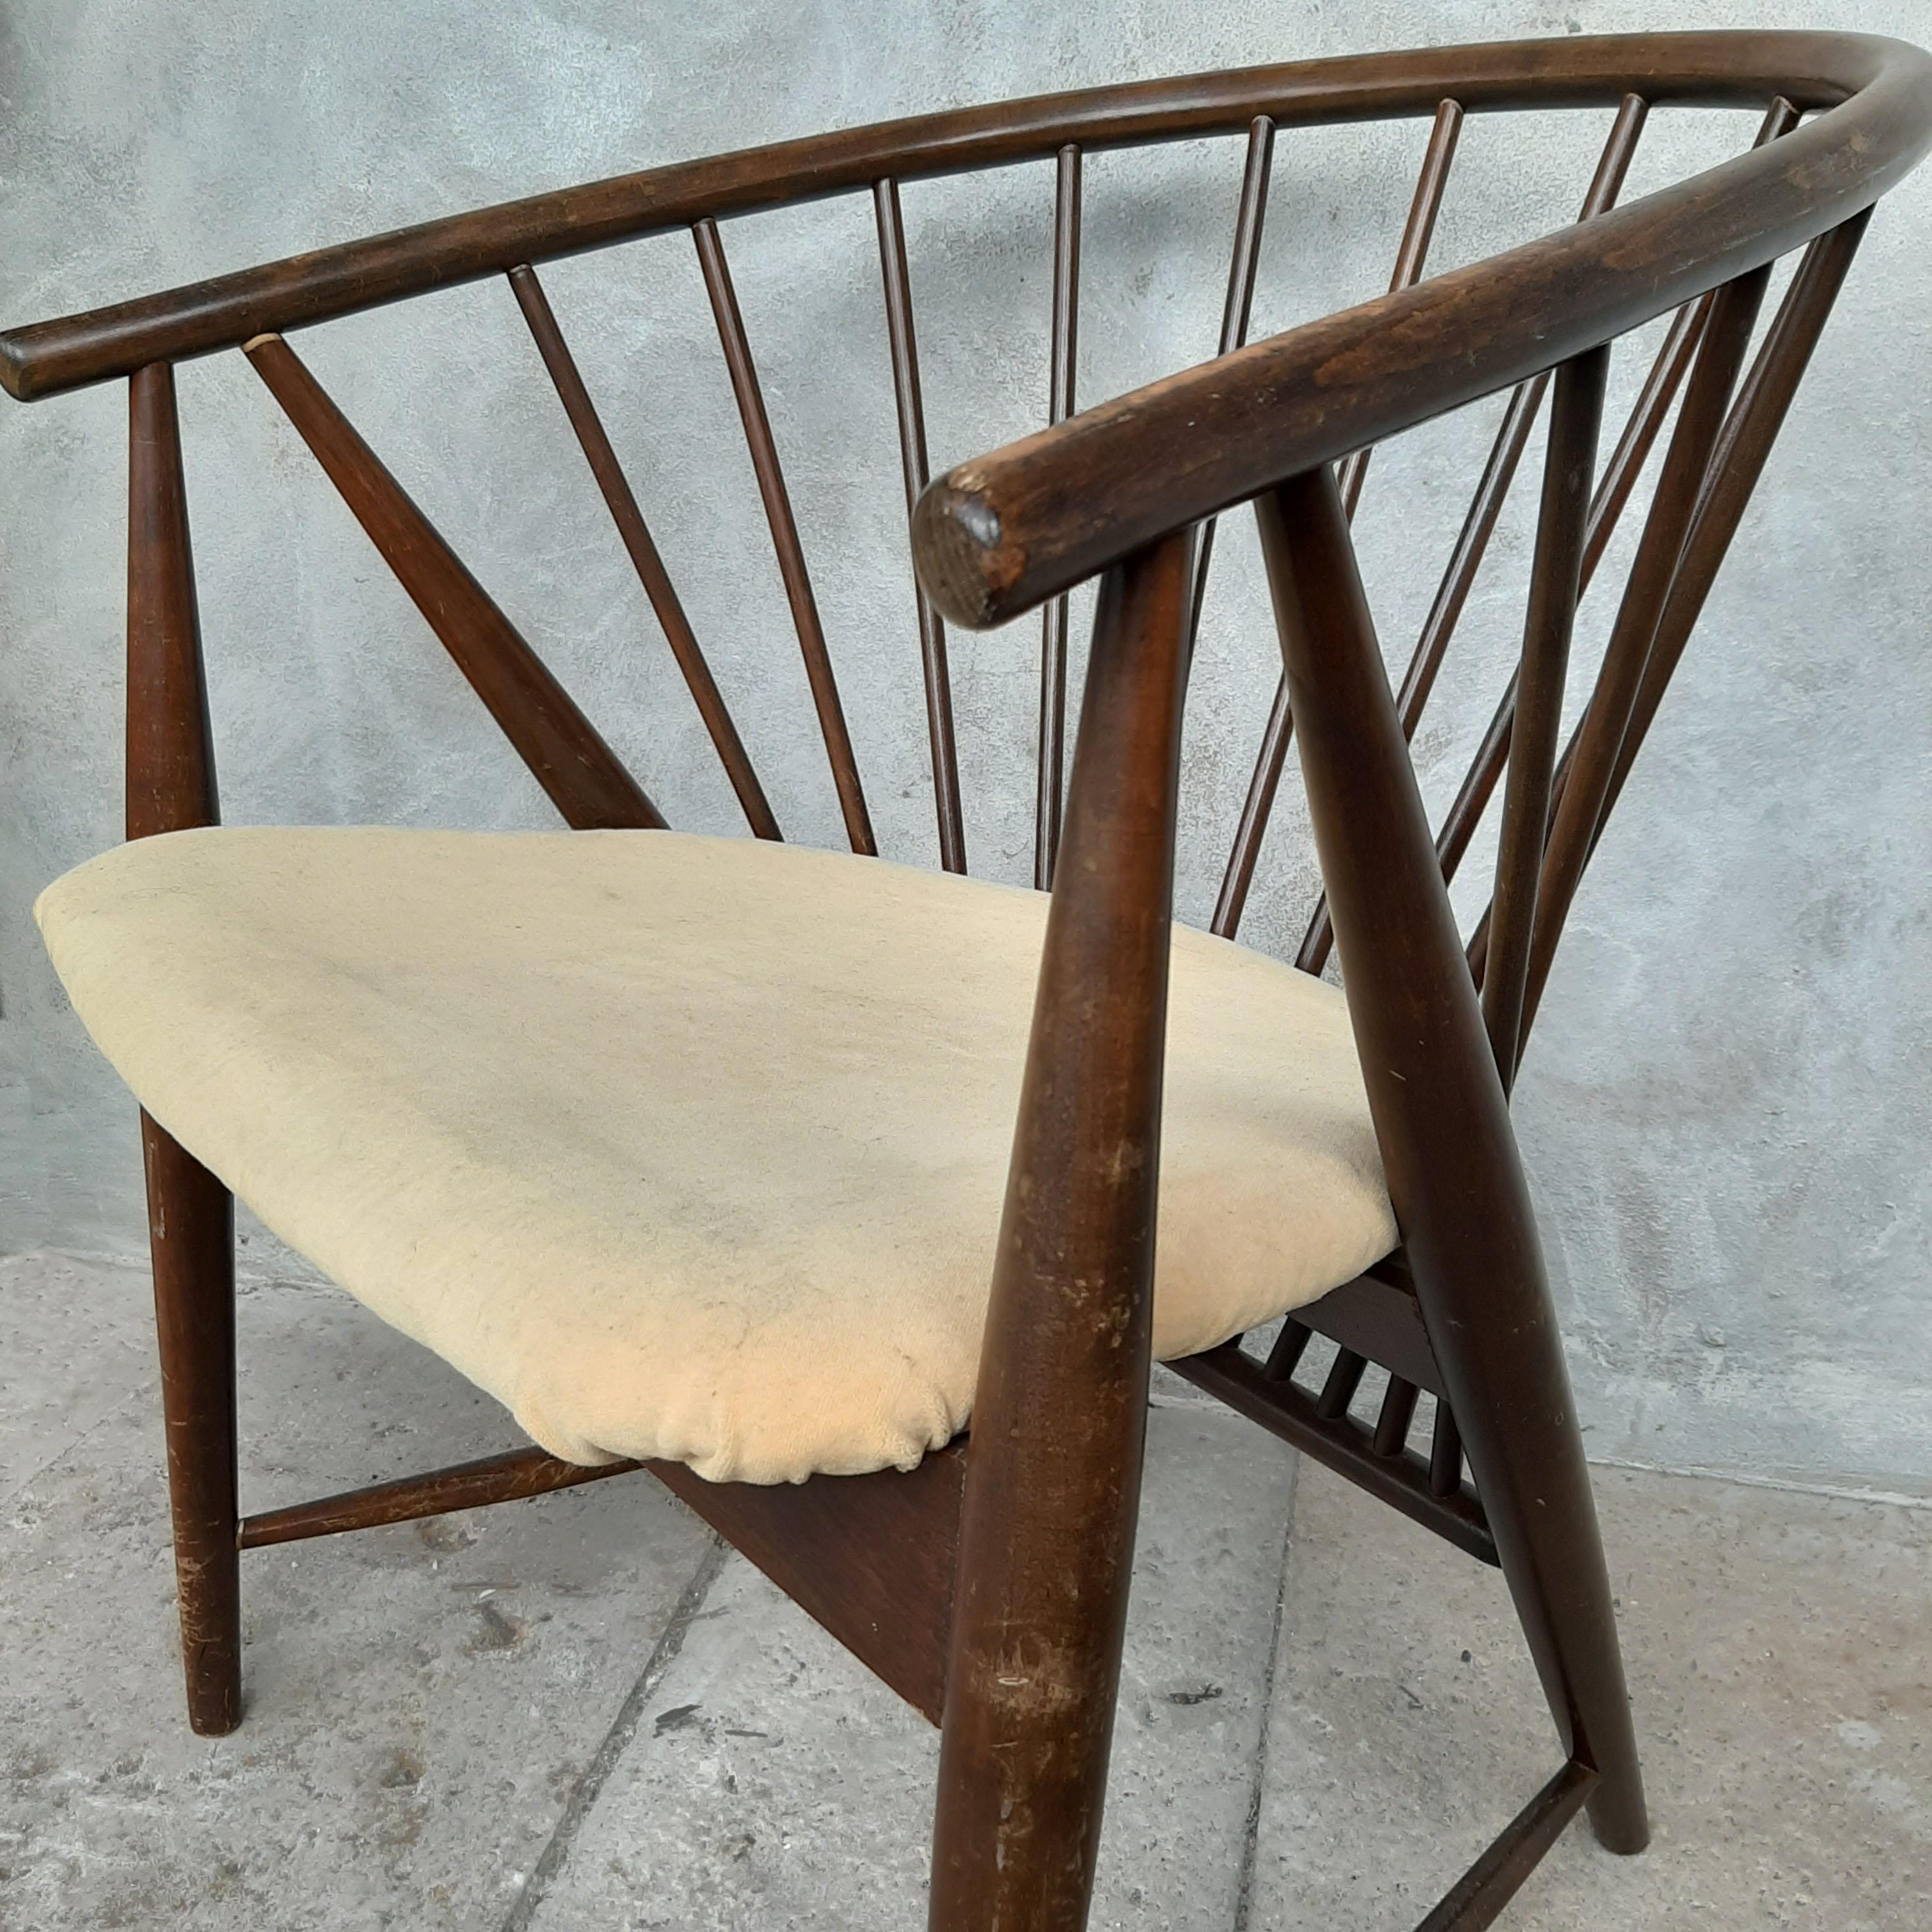 Swedish Midcentury Scandinavian Sunfeather Chair by Sonna Rosen For Sale